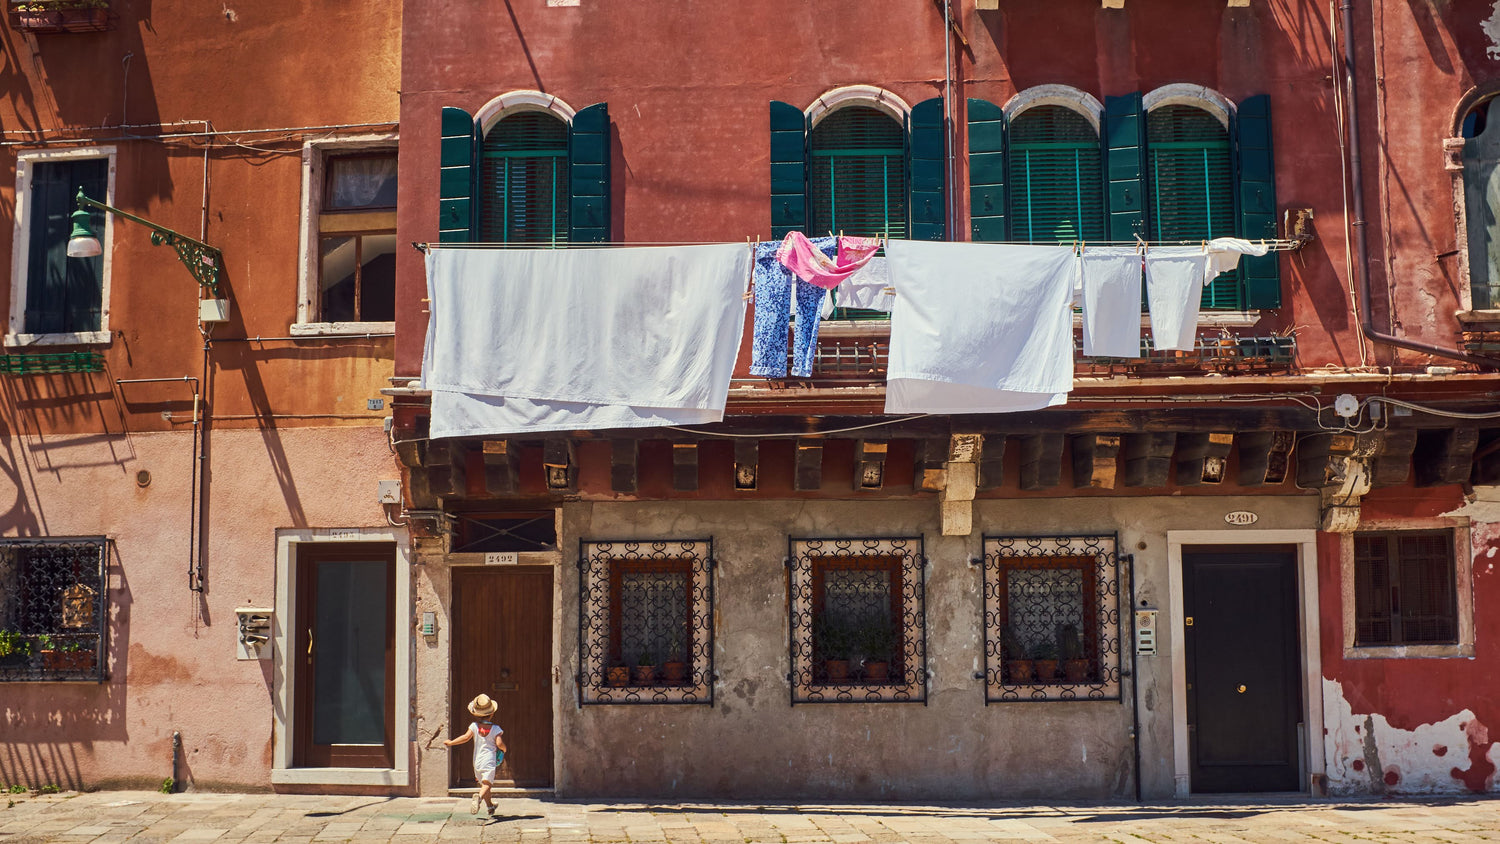 Scenic photo of Venice Italy with outdoor laundry